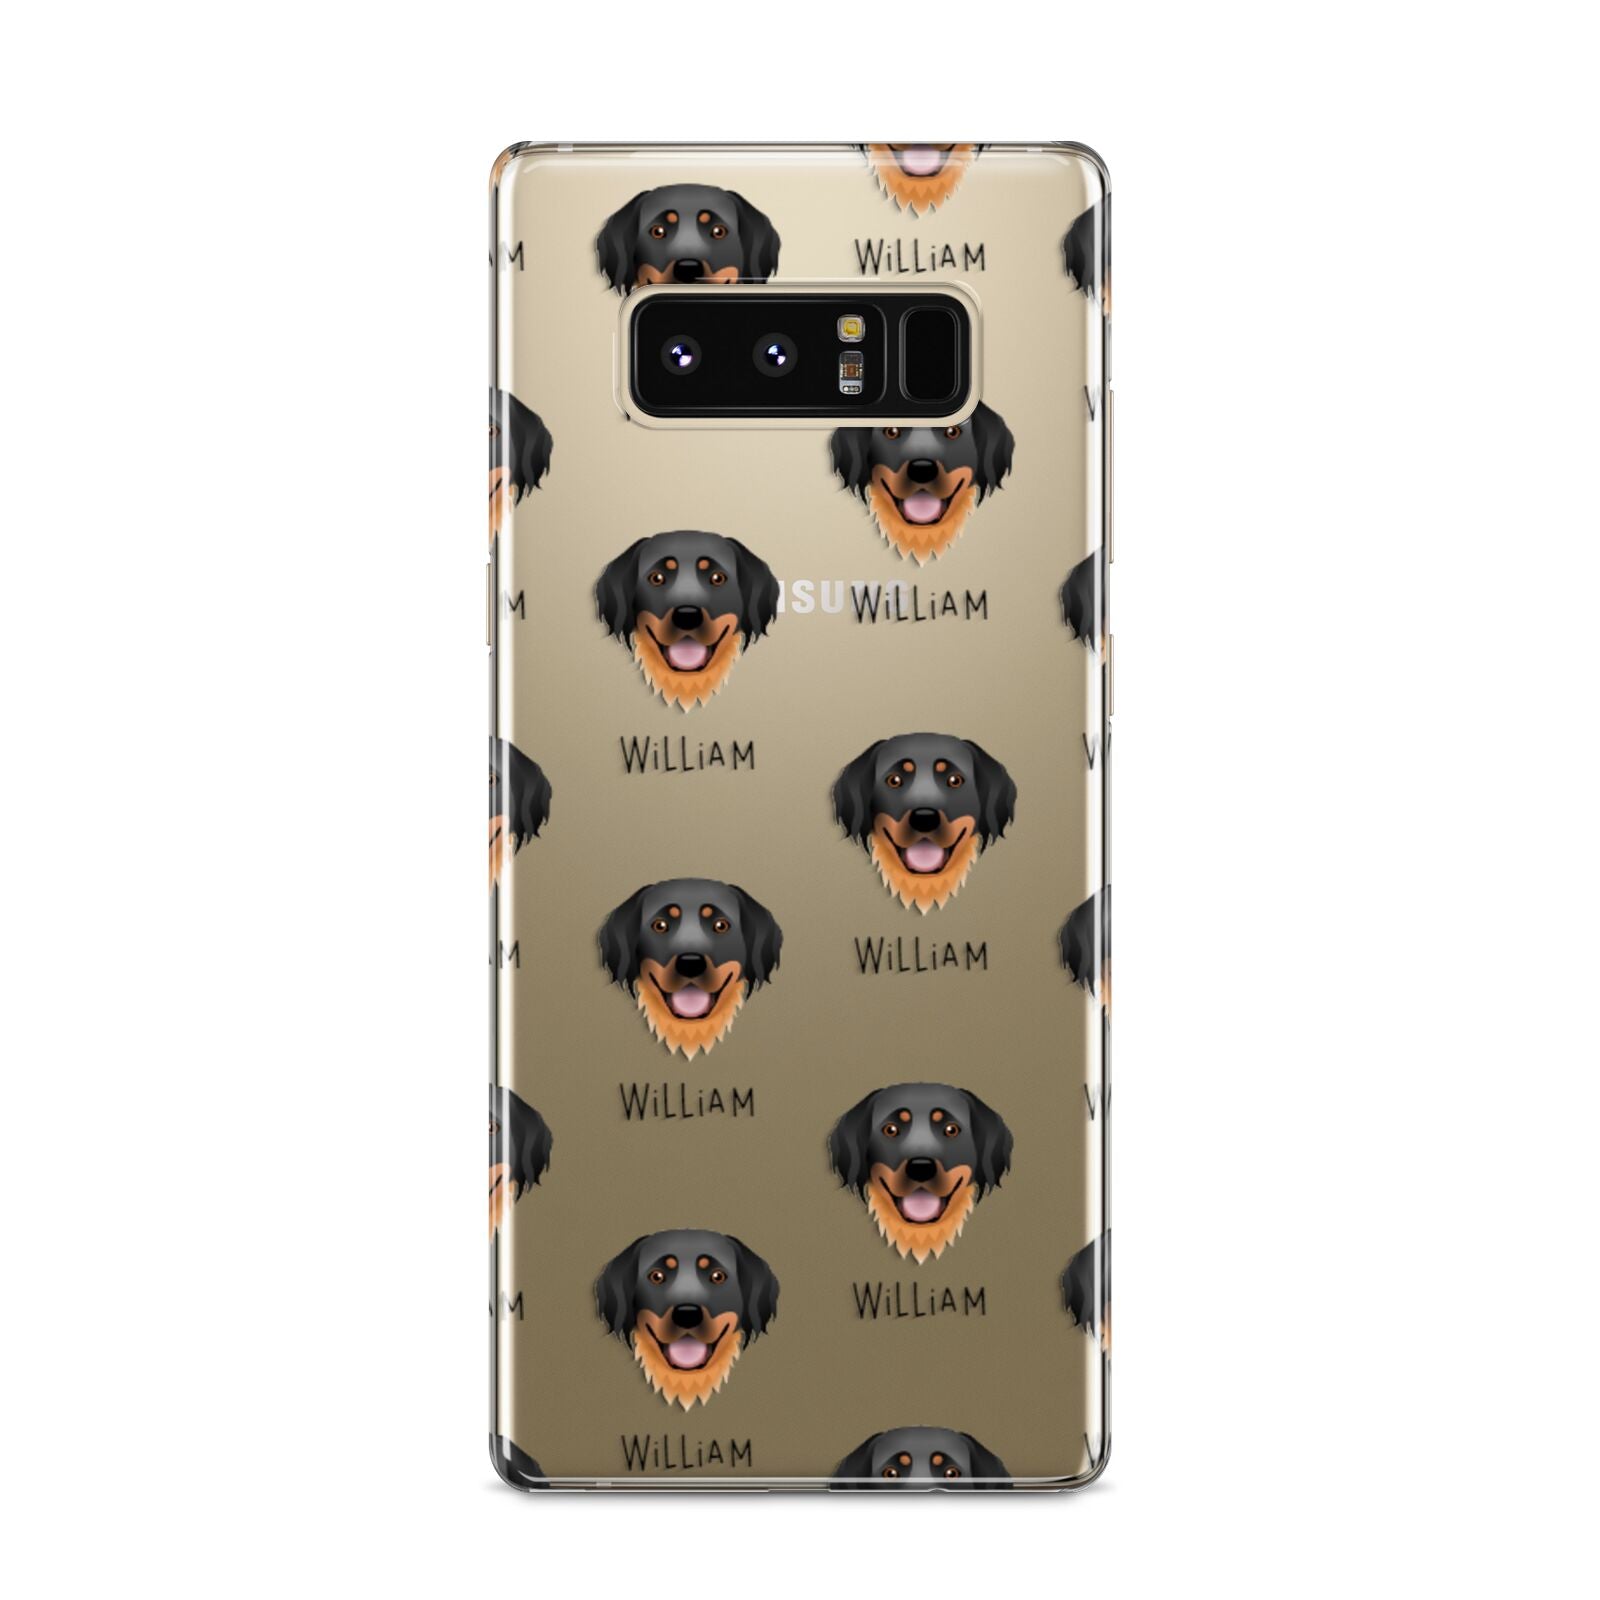 Hovawart Icon with Name Samsung Galaxy S8 Case